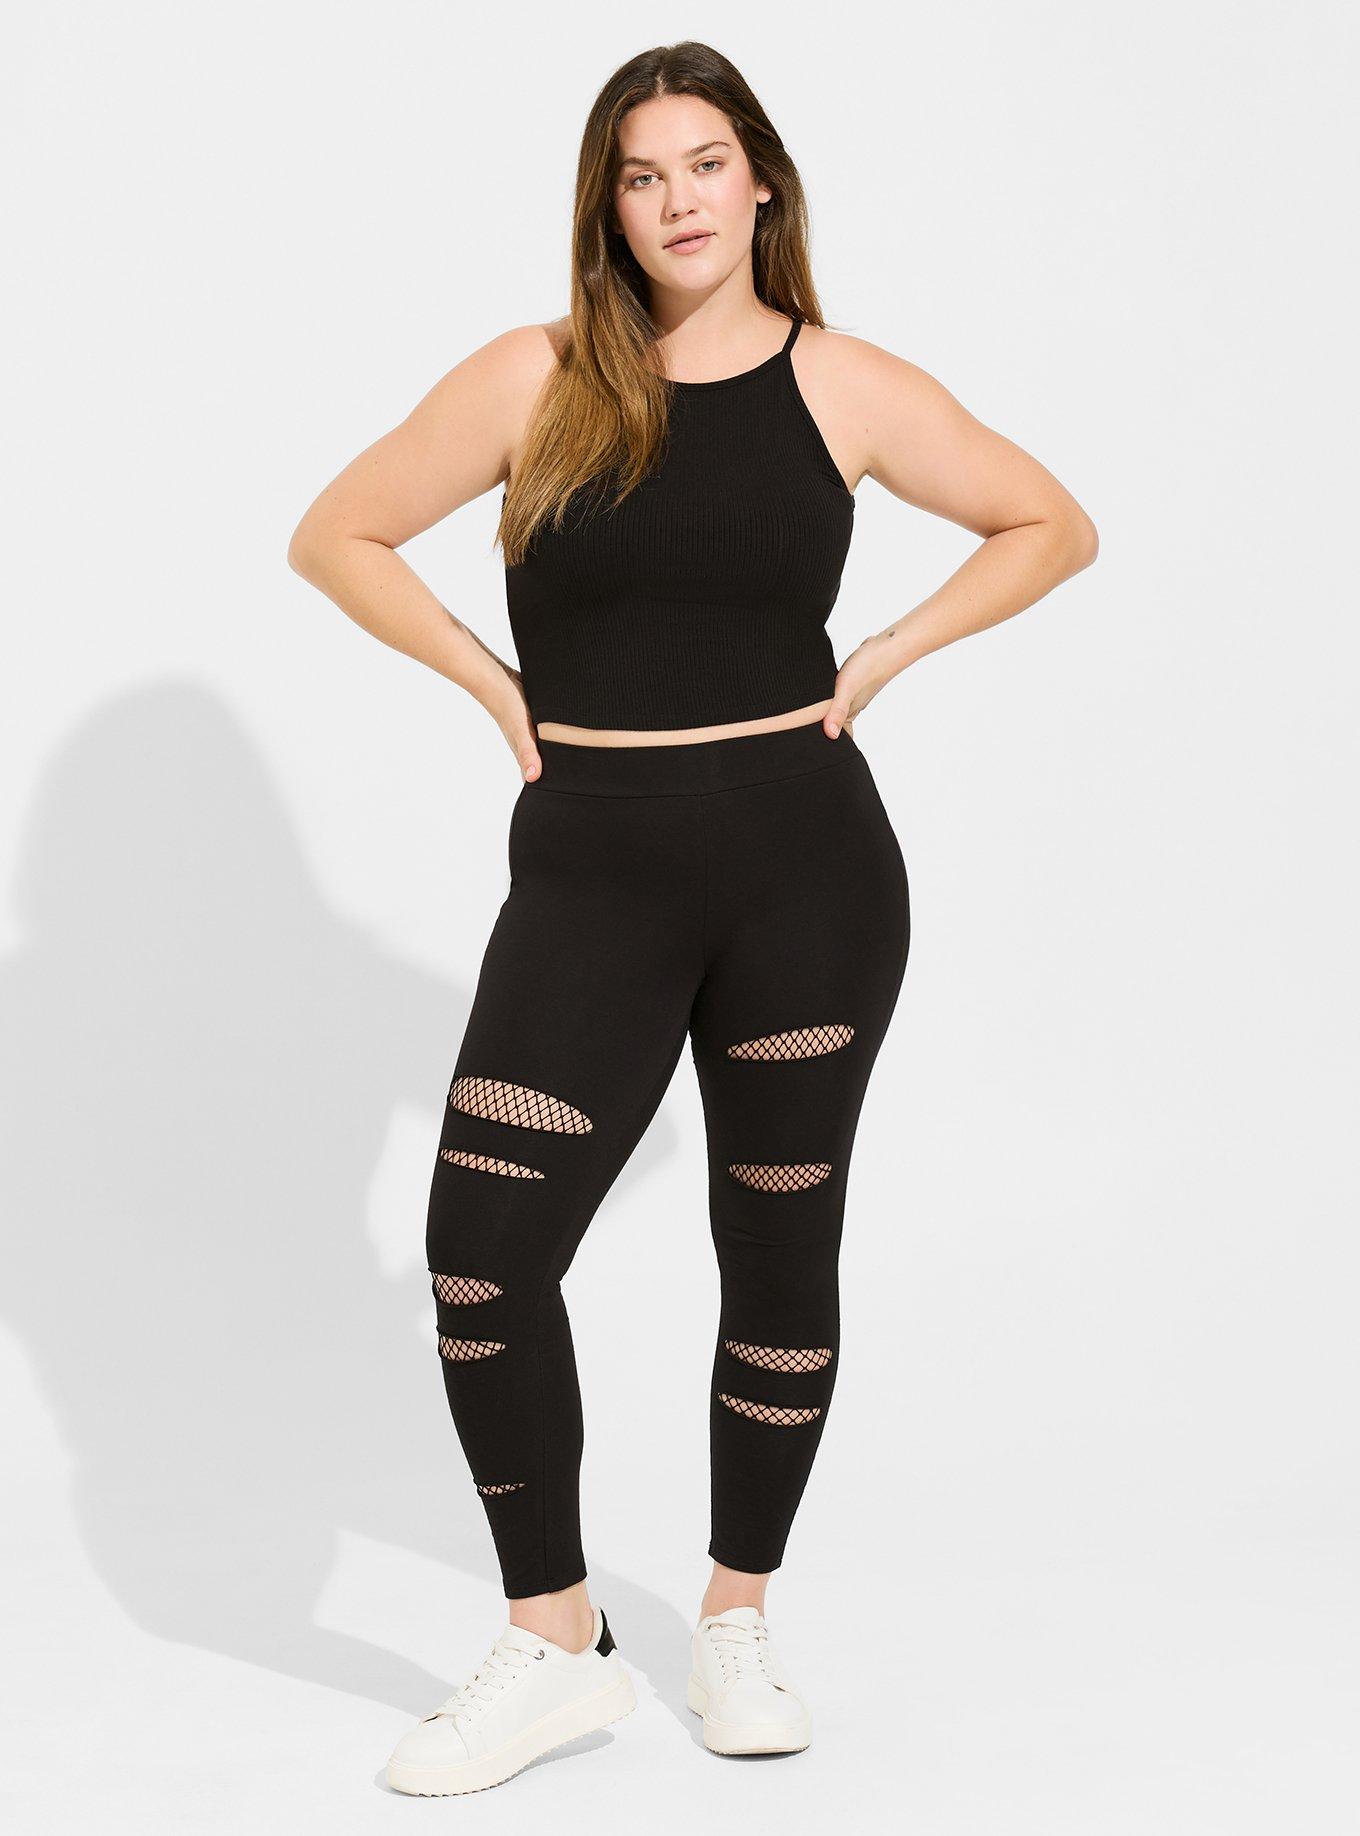 Ripped Leggings Outfits